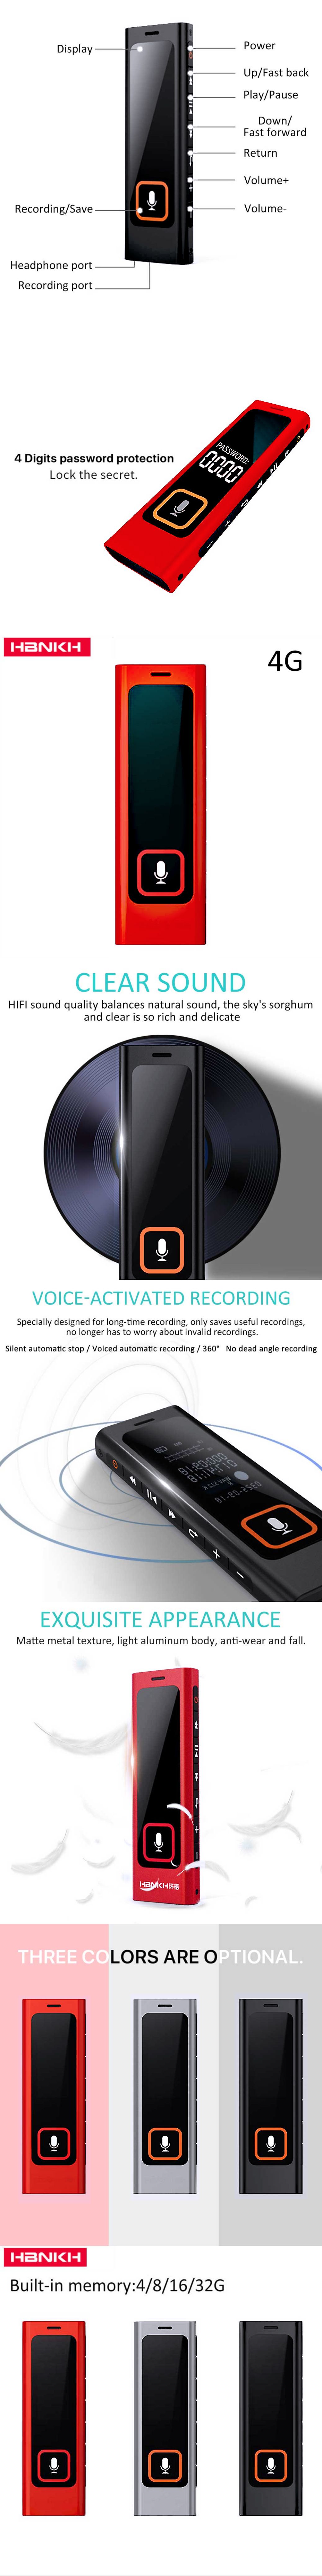 HBNKH-H-R510-8GB-Recording-Pen-HD-Noise-Reduction-Voice-Recorder-60M-Record-MP3-Player-Built-in-Spea-1571047